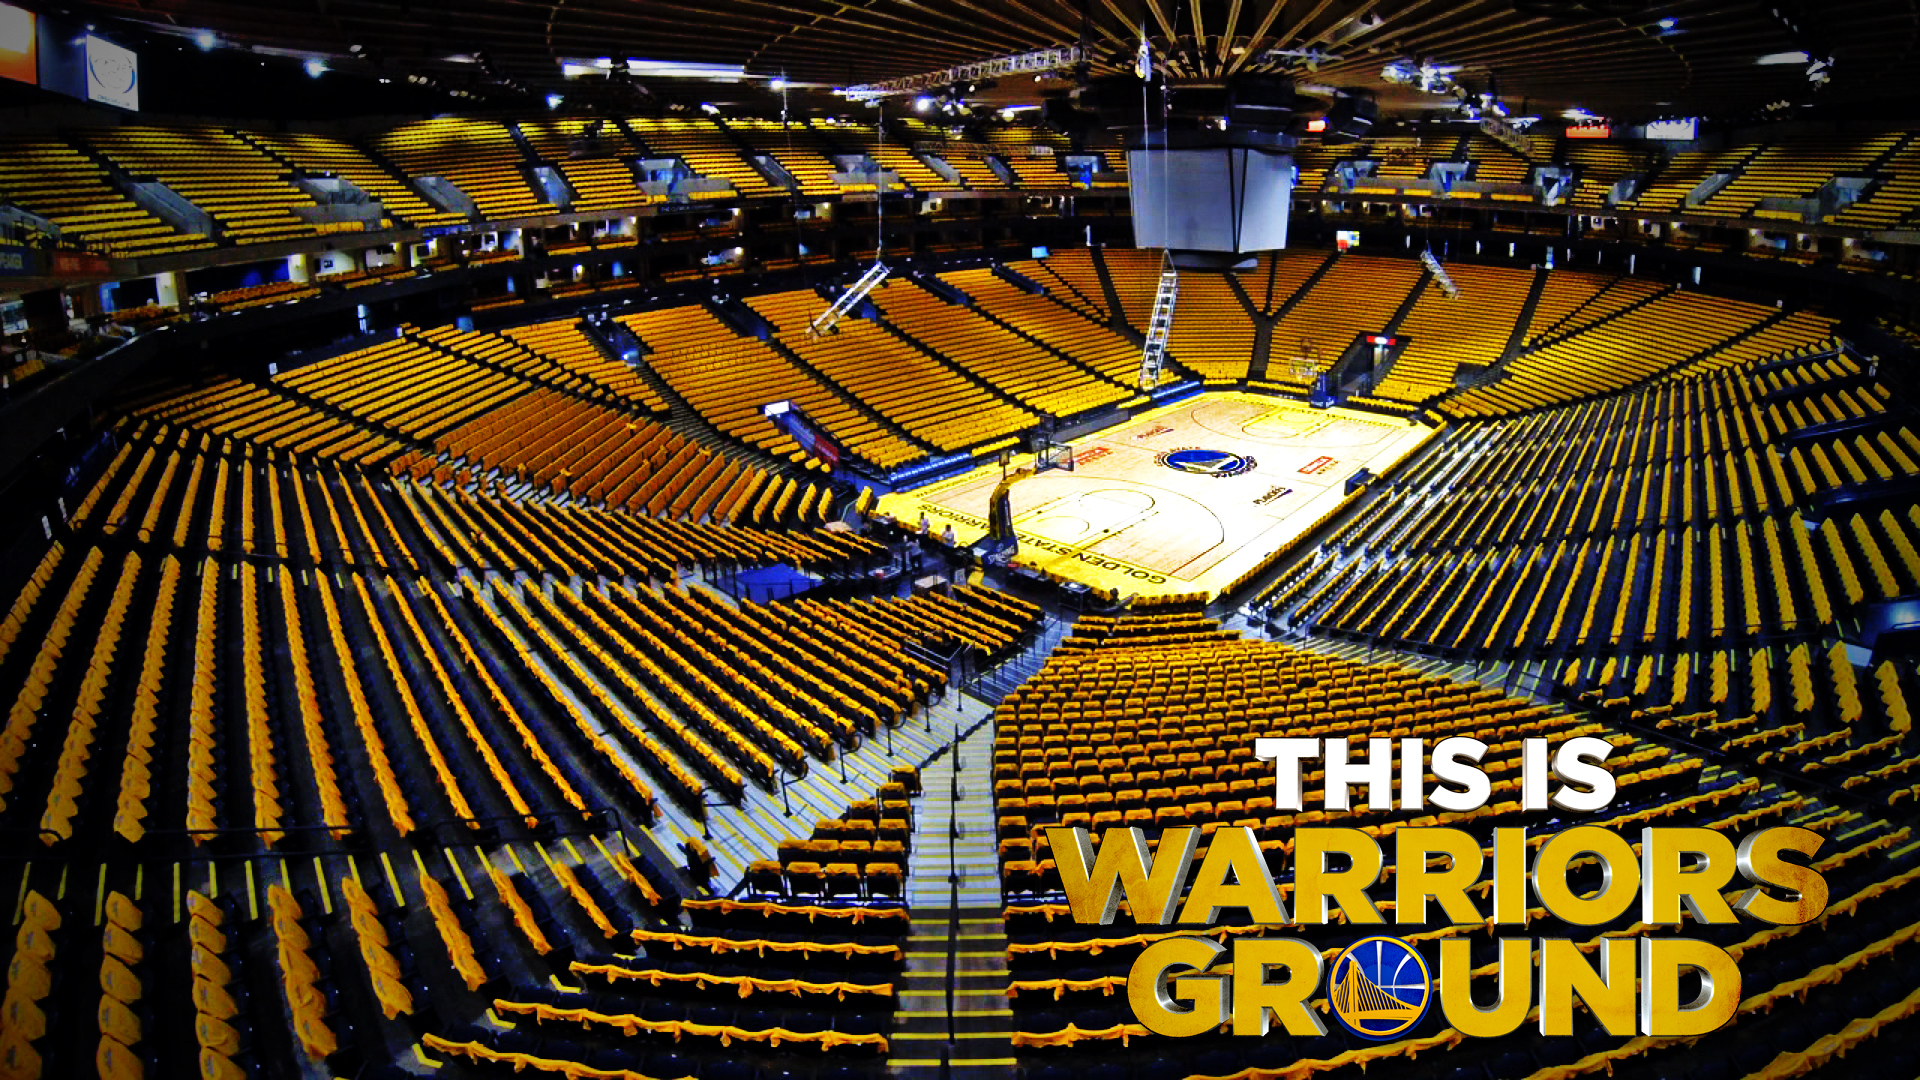 Download wallpapers Golden State Warriors flag 4k blue and yellow 3D  waves NBA american basketball team Golden State Warriors logo  basketball Golden State Warriors for desktop with resolution 3840x2400  High Quality HD